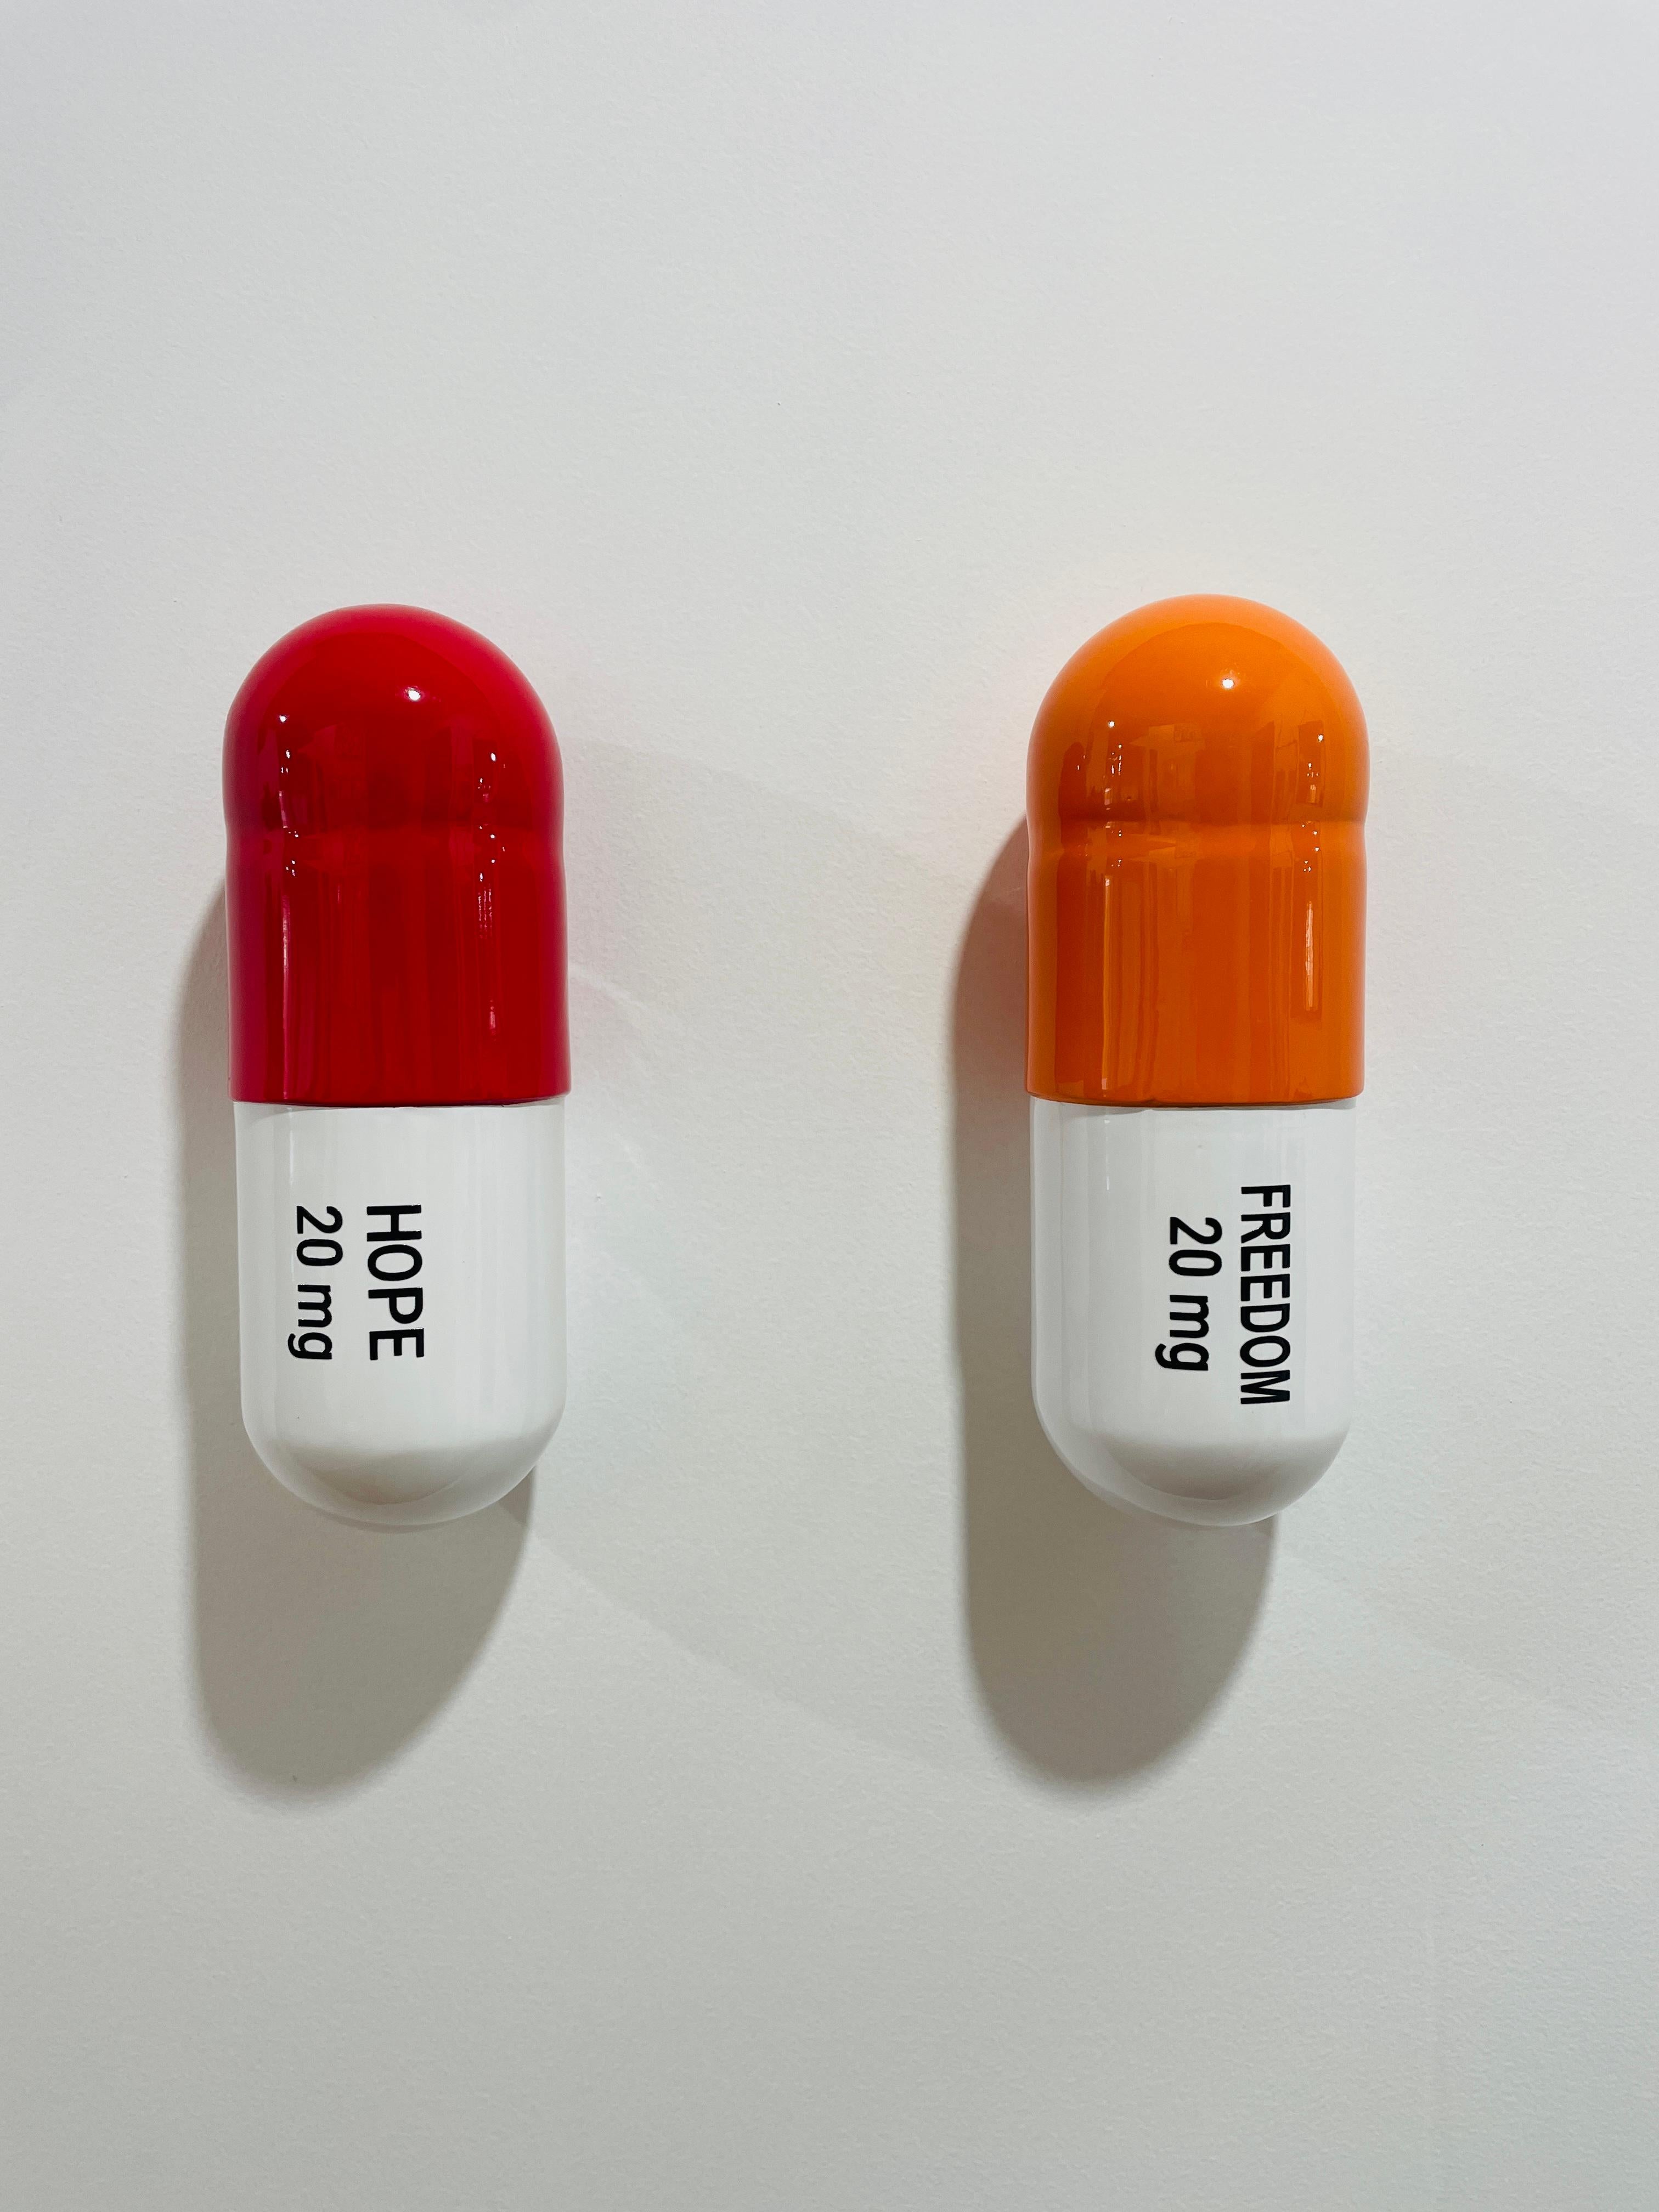 Tal Nehoray Still-Life Sculpture - 20 MG Hope Freedom pill Combo (red, orange, white) - figurative sculpture